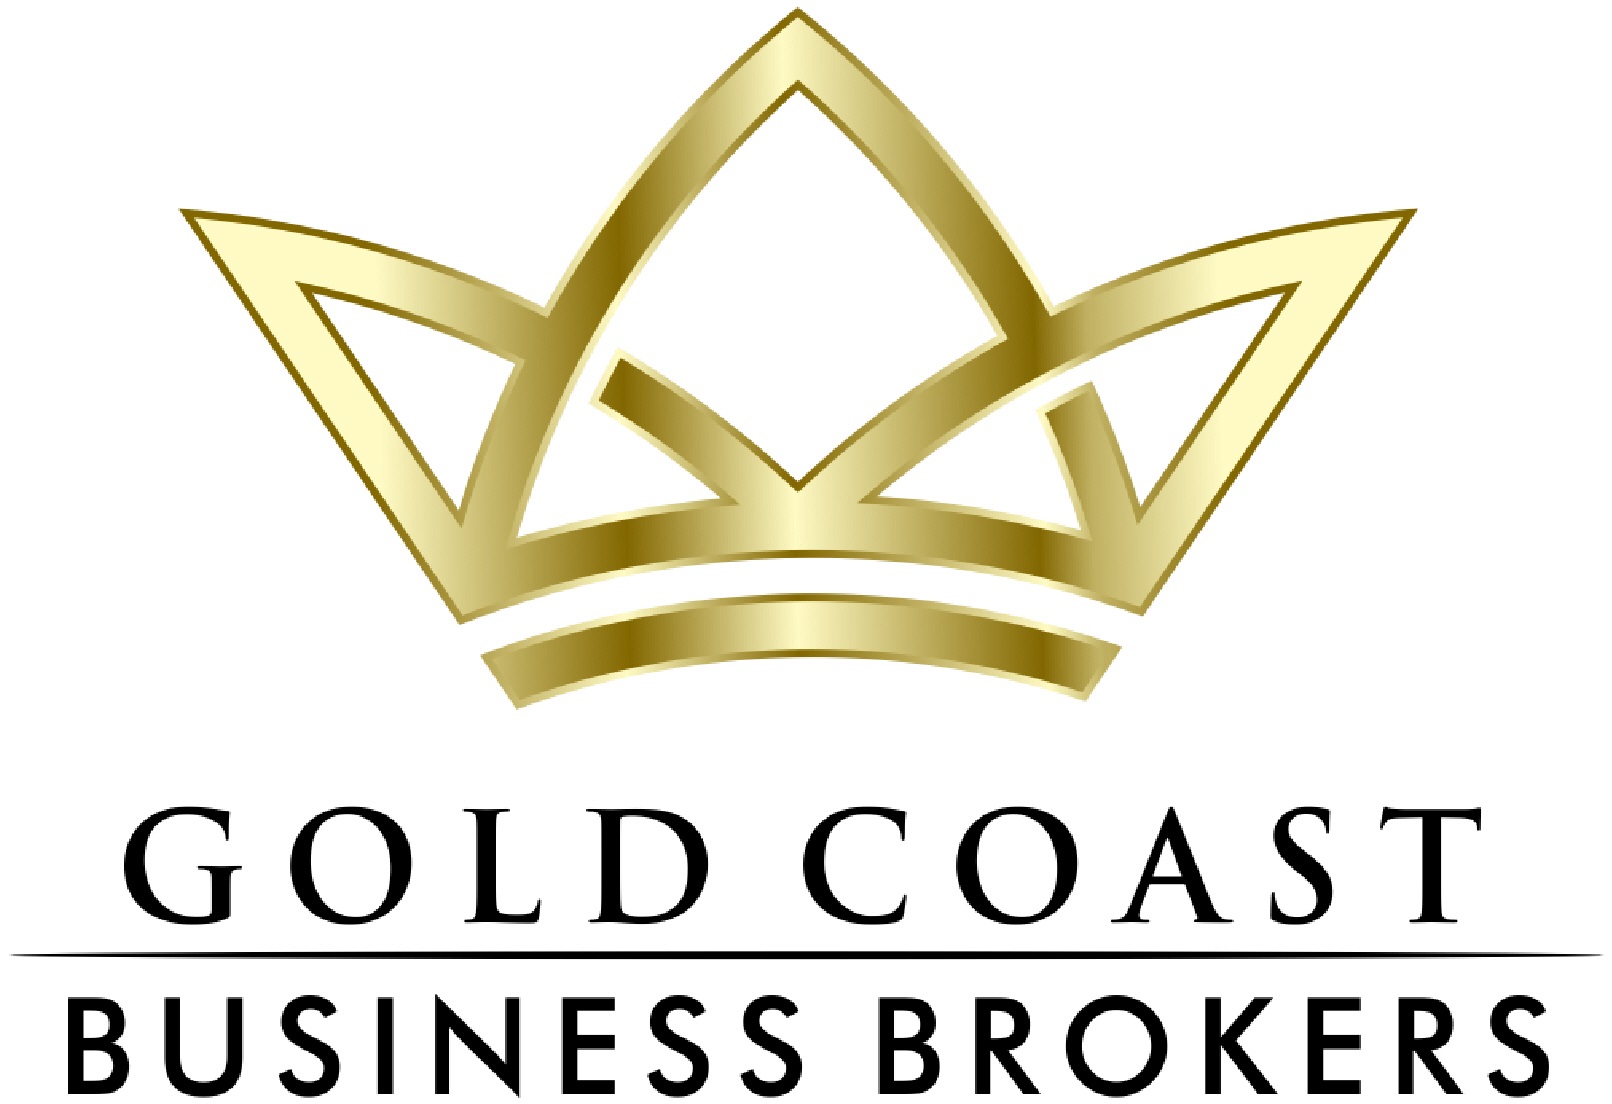 Gold Coast Business Brokers